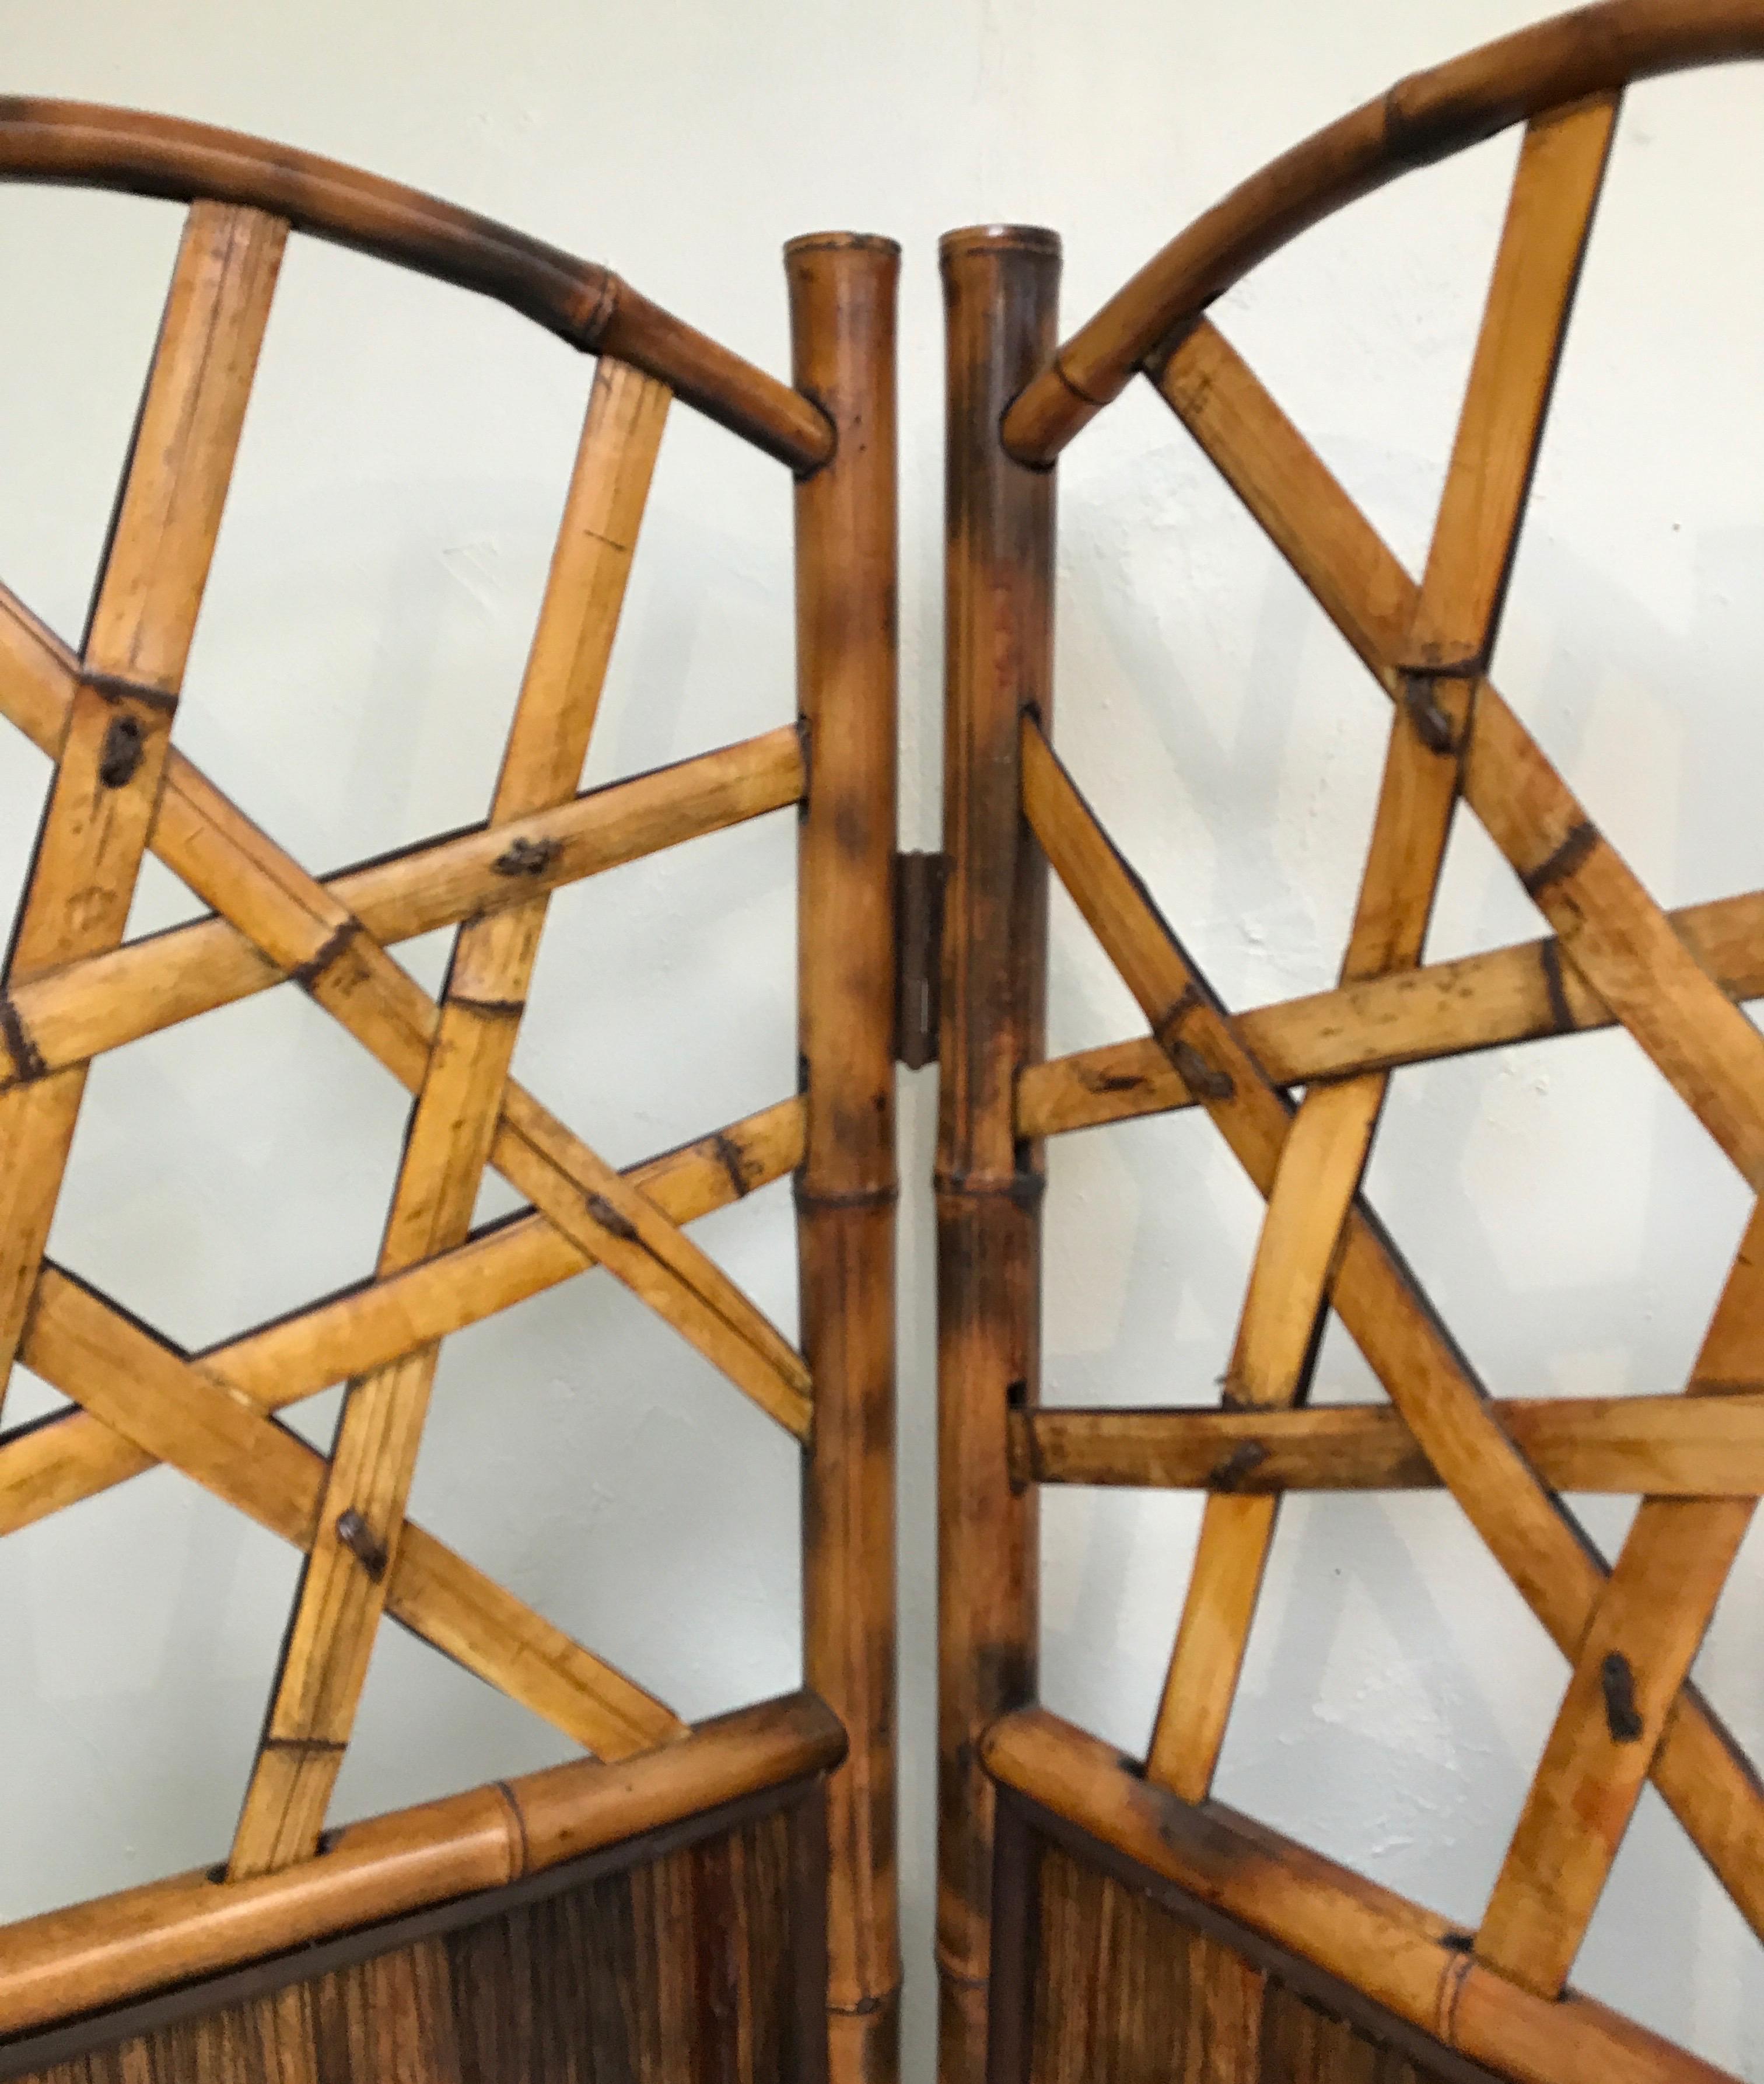 20th Century Vintage Three-Panel Bamboo Screen For Sale